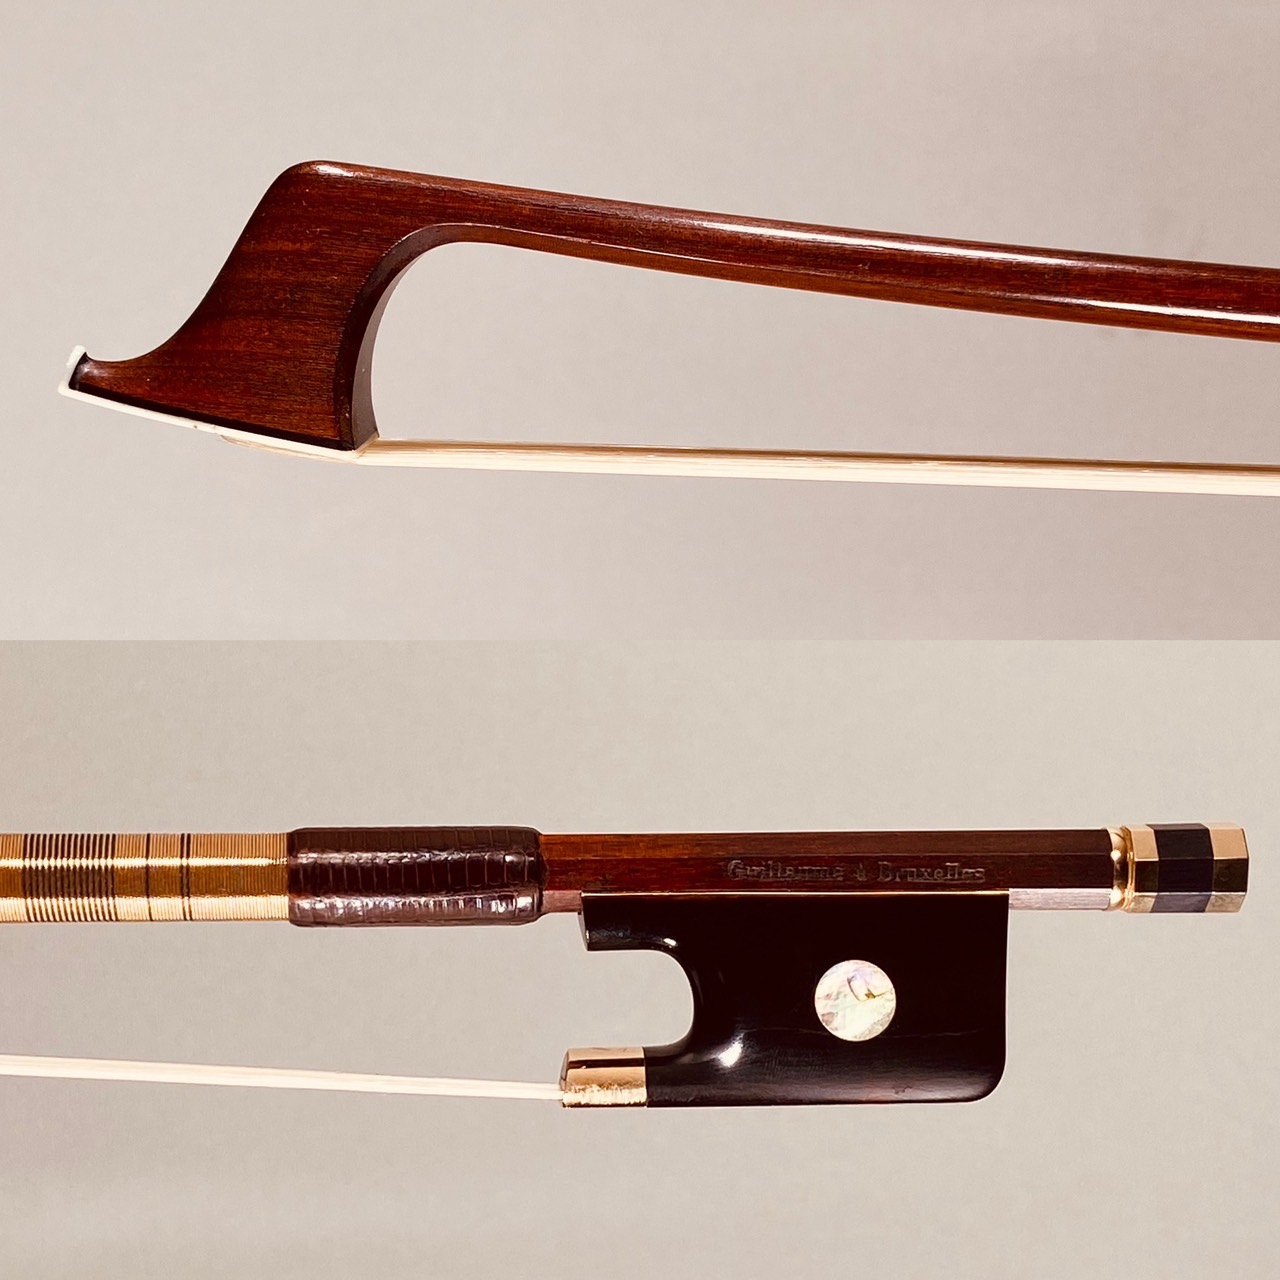 *Pierre Guillaume, Belgium - Bruxelles, 2010(USED), Gold Mounted & Tortoiseshell |]]-Model：Personal]]-Stick：Round]]-Wrapping：Gold]]-Frog：Tortoiseshell […]